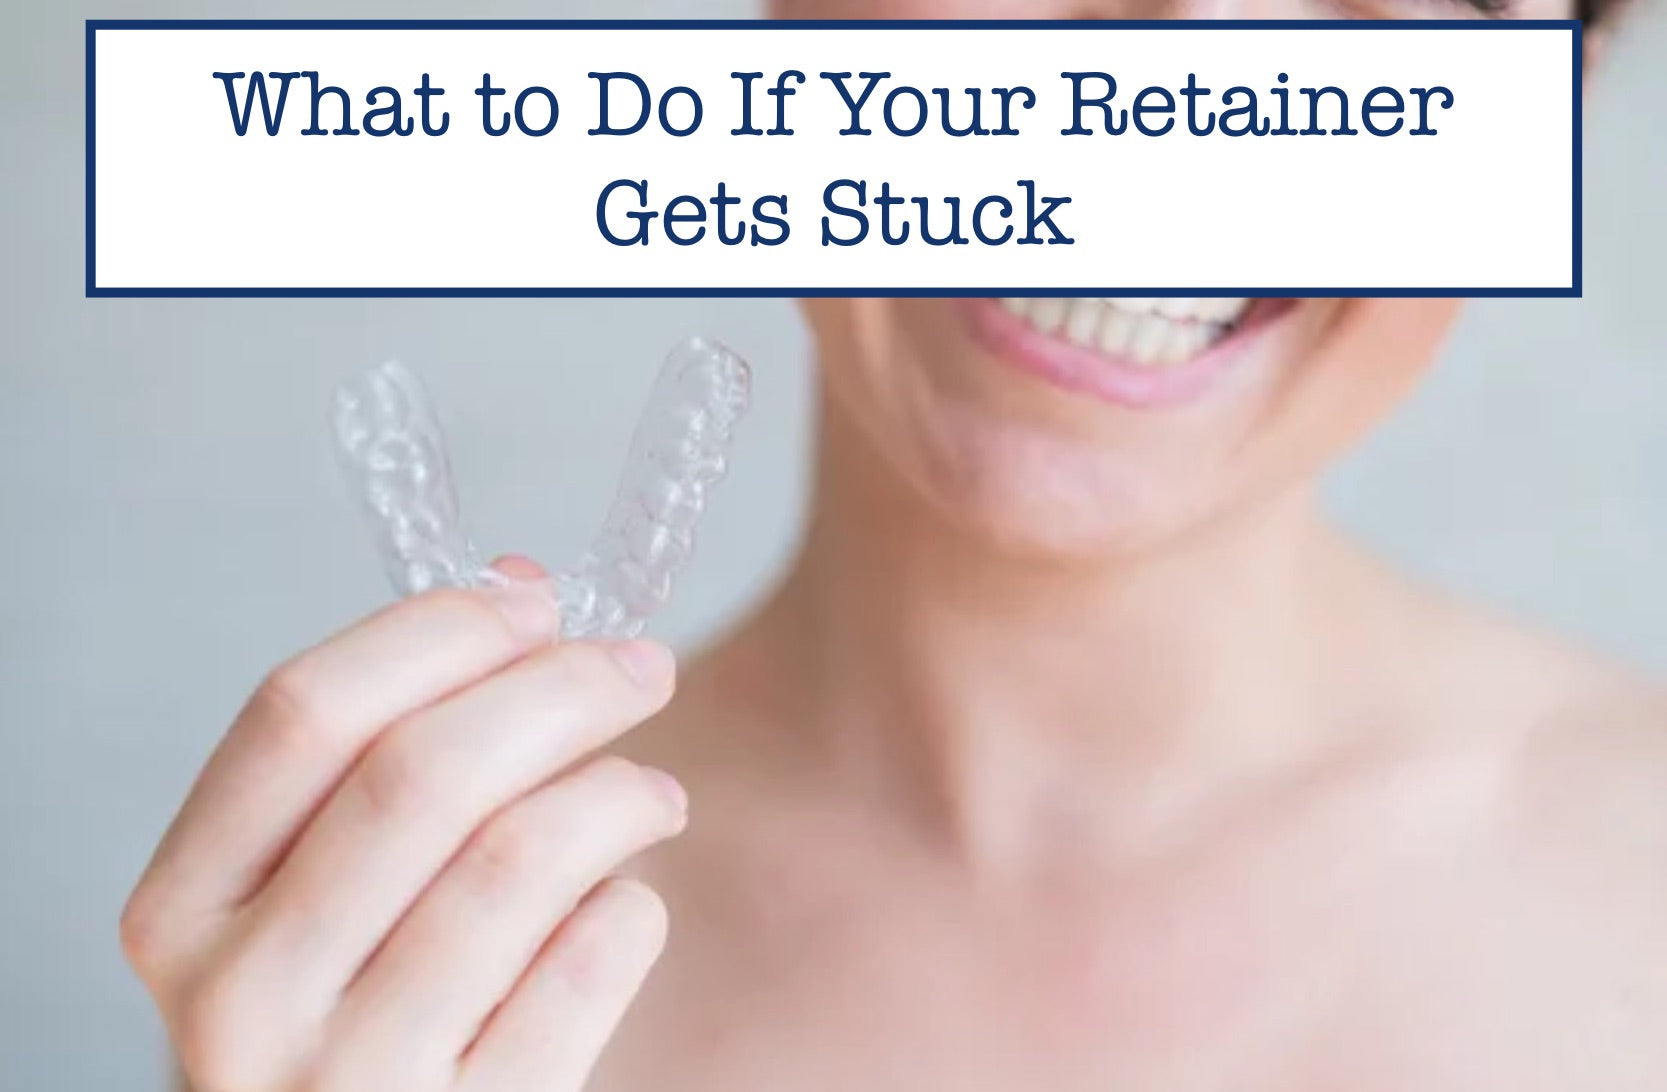 What to Do If Your Retainer Gets Stuck